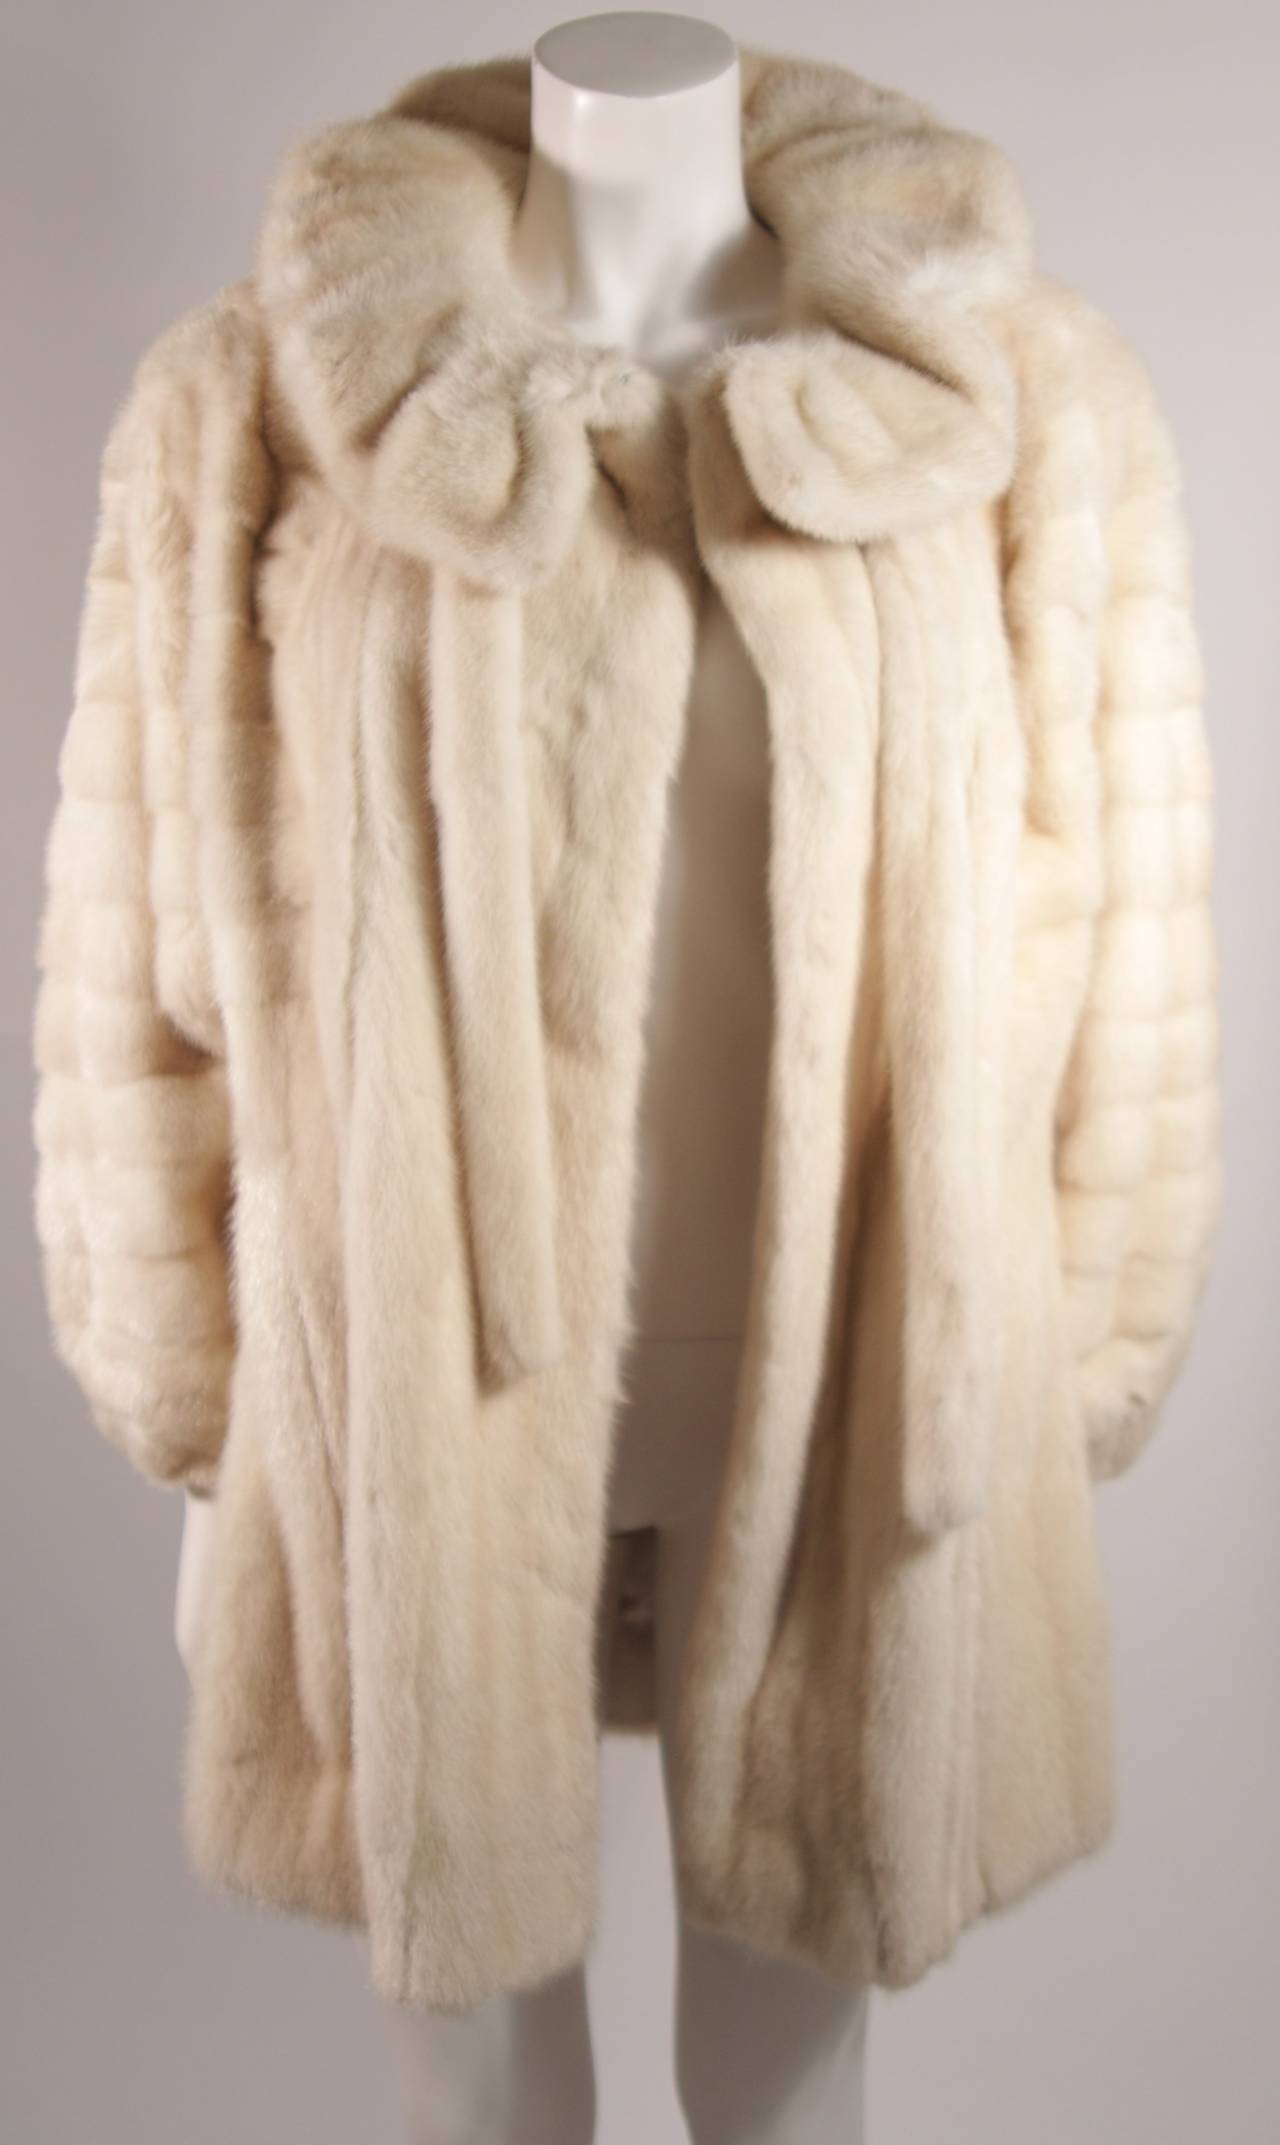 Galanos Ivory Mink Coat with Ruffle Tie Collar and Full Sleeves & Stretch cuff For Sale 2